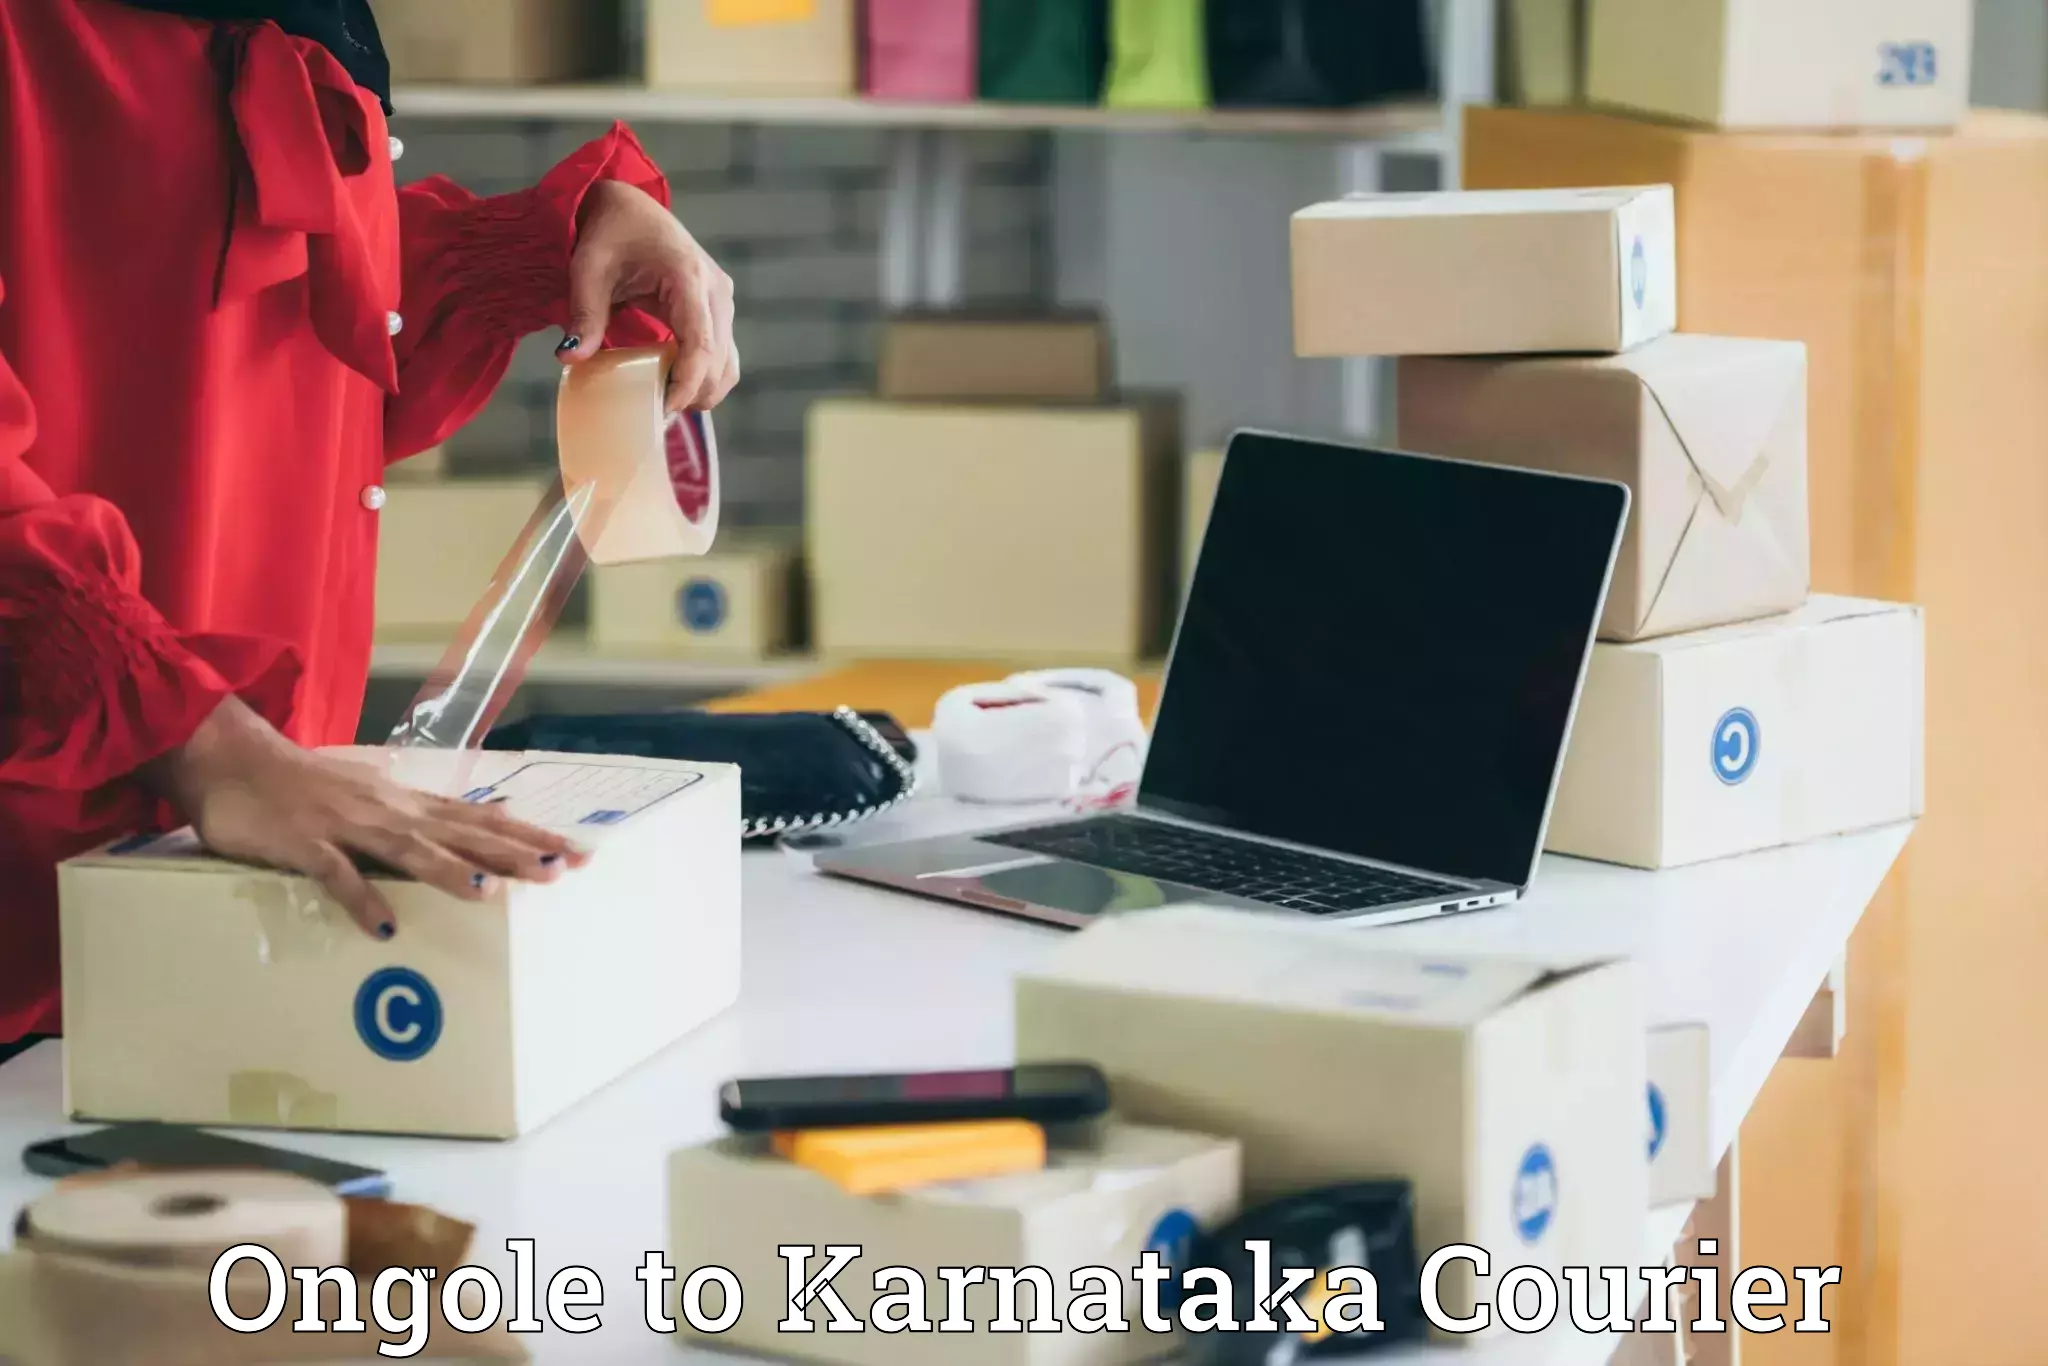 International parcel service Ongole to Channapatna